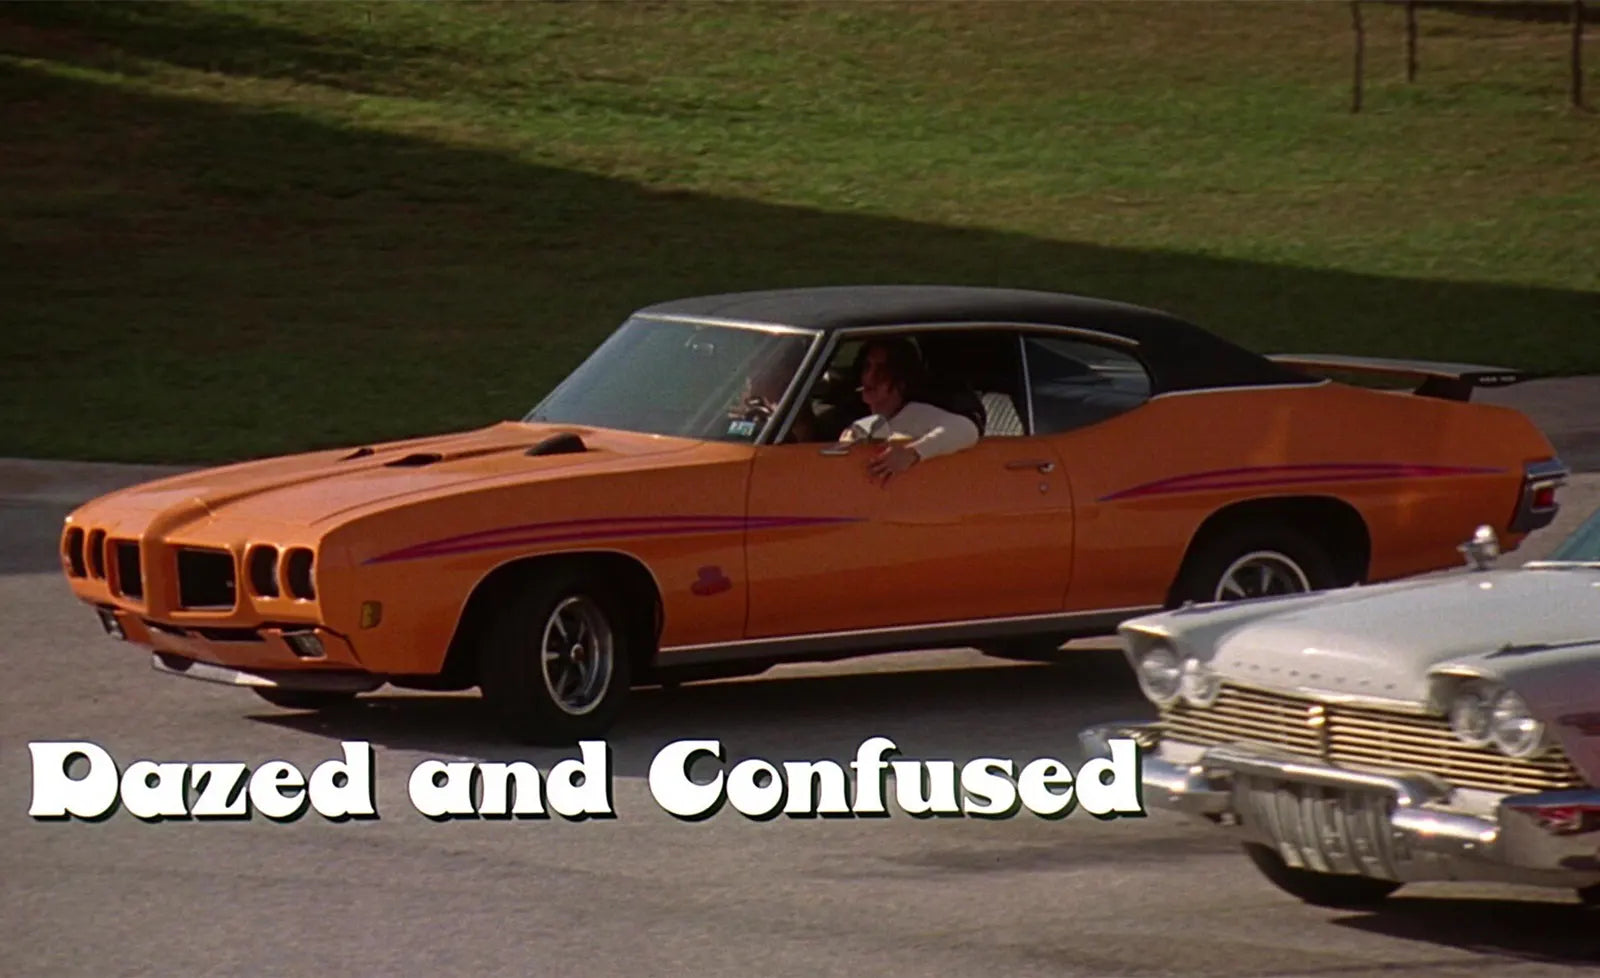 "Dazed and Confused" - The Fundamental Stoner Movie.